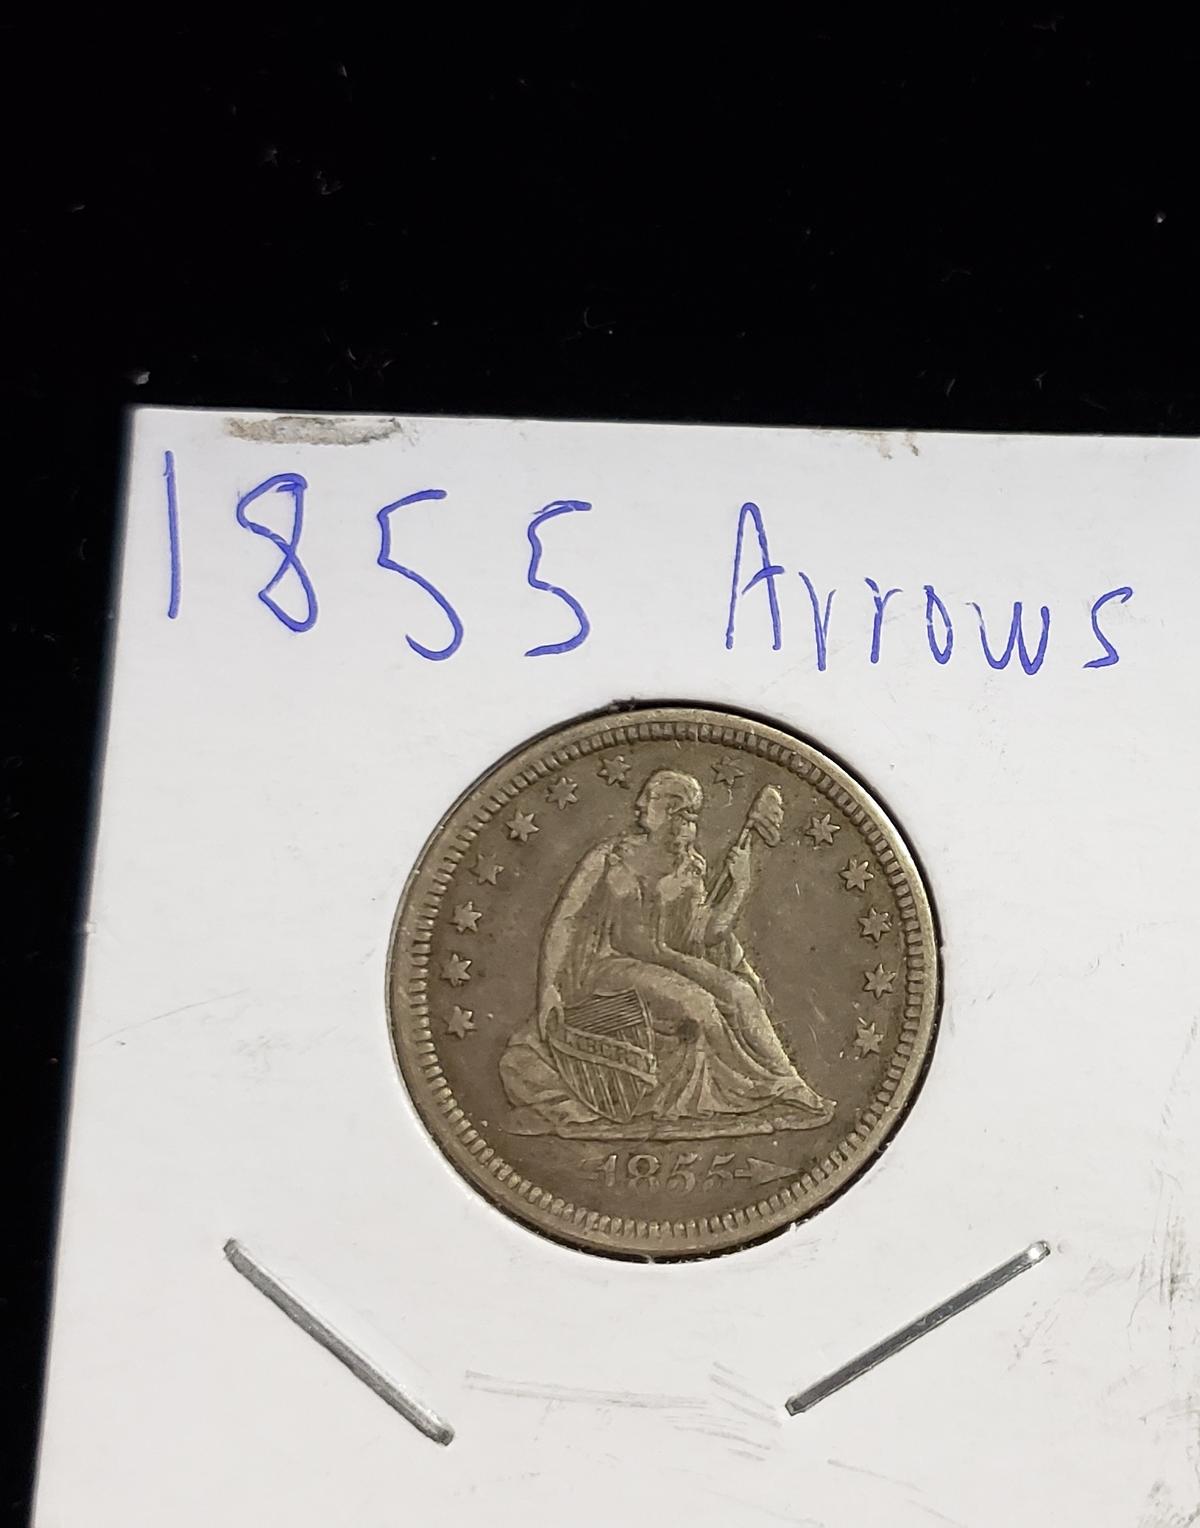 1855 ARROWS SEATED LIBERTY 25¢ COIN